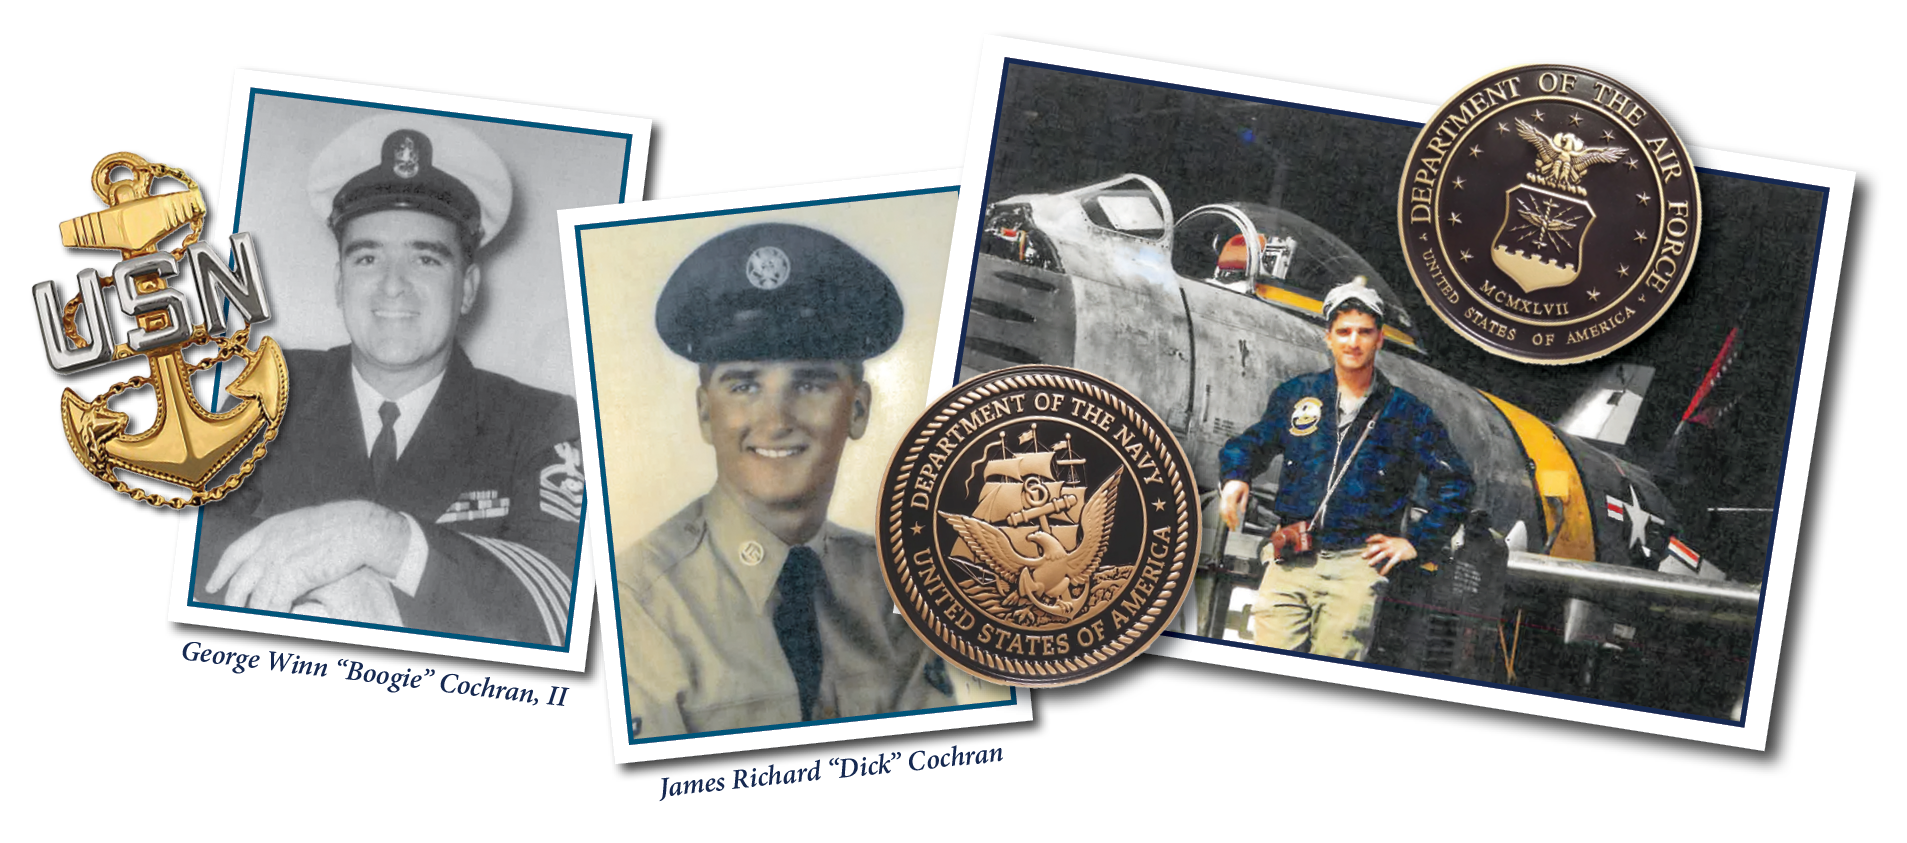 images of George and James in their military garb as well as military memorabilia form their service.